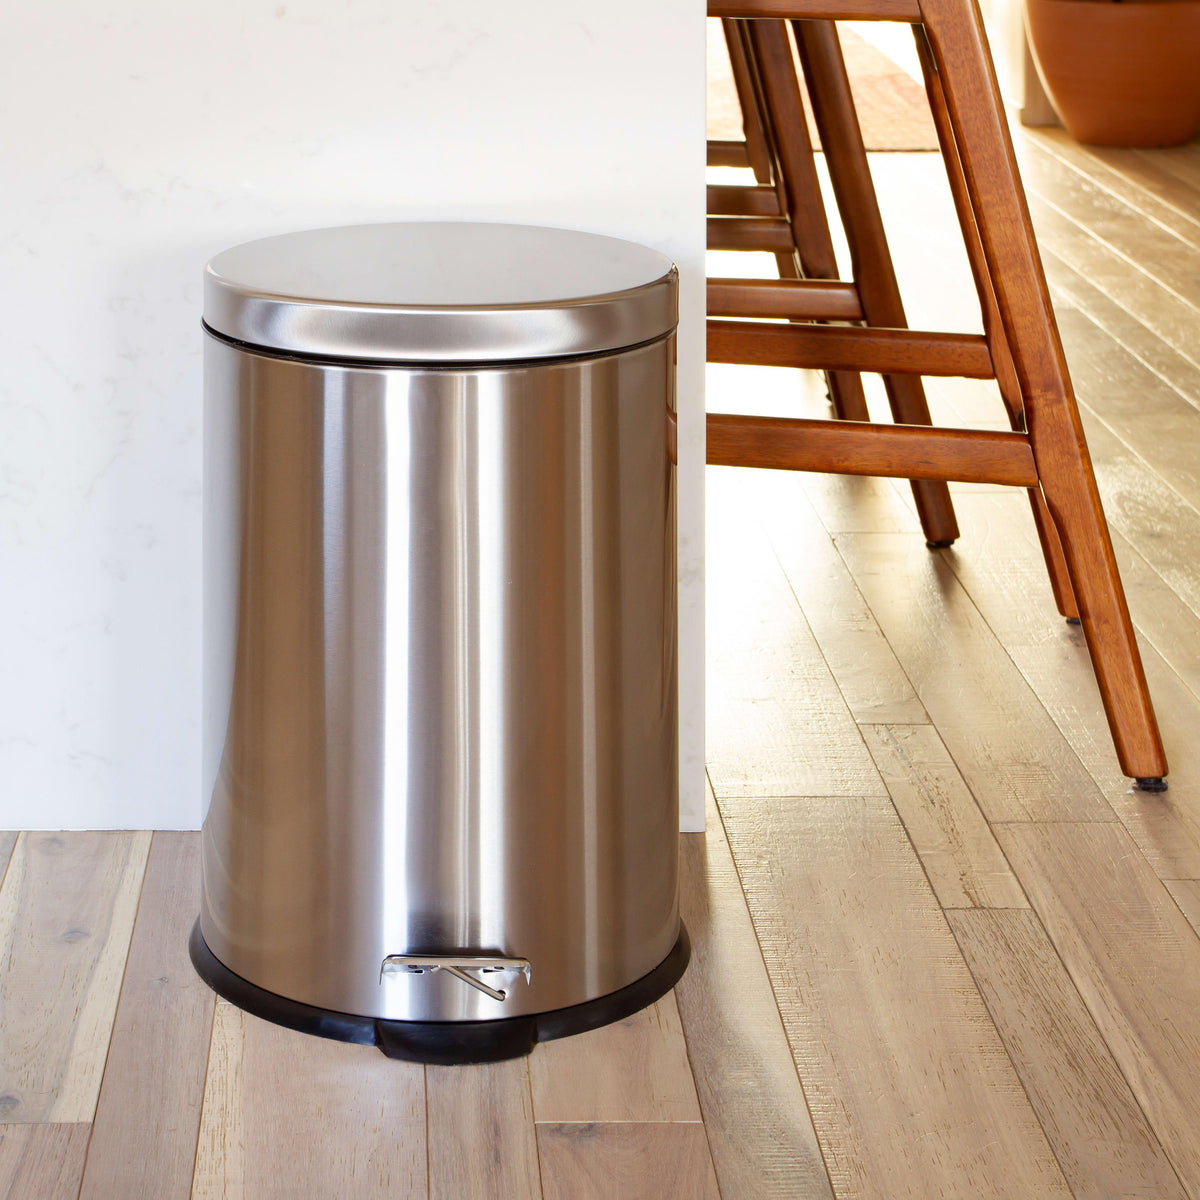 20L (5.3 Gallons) |#| Stainless Steel Imprint Resistant Soft Close, Step Trash Can - 5.3 Gallons (20L)